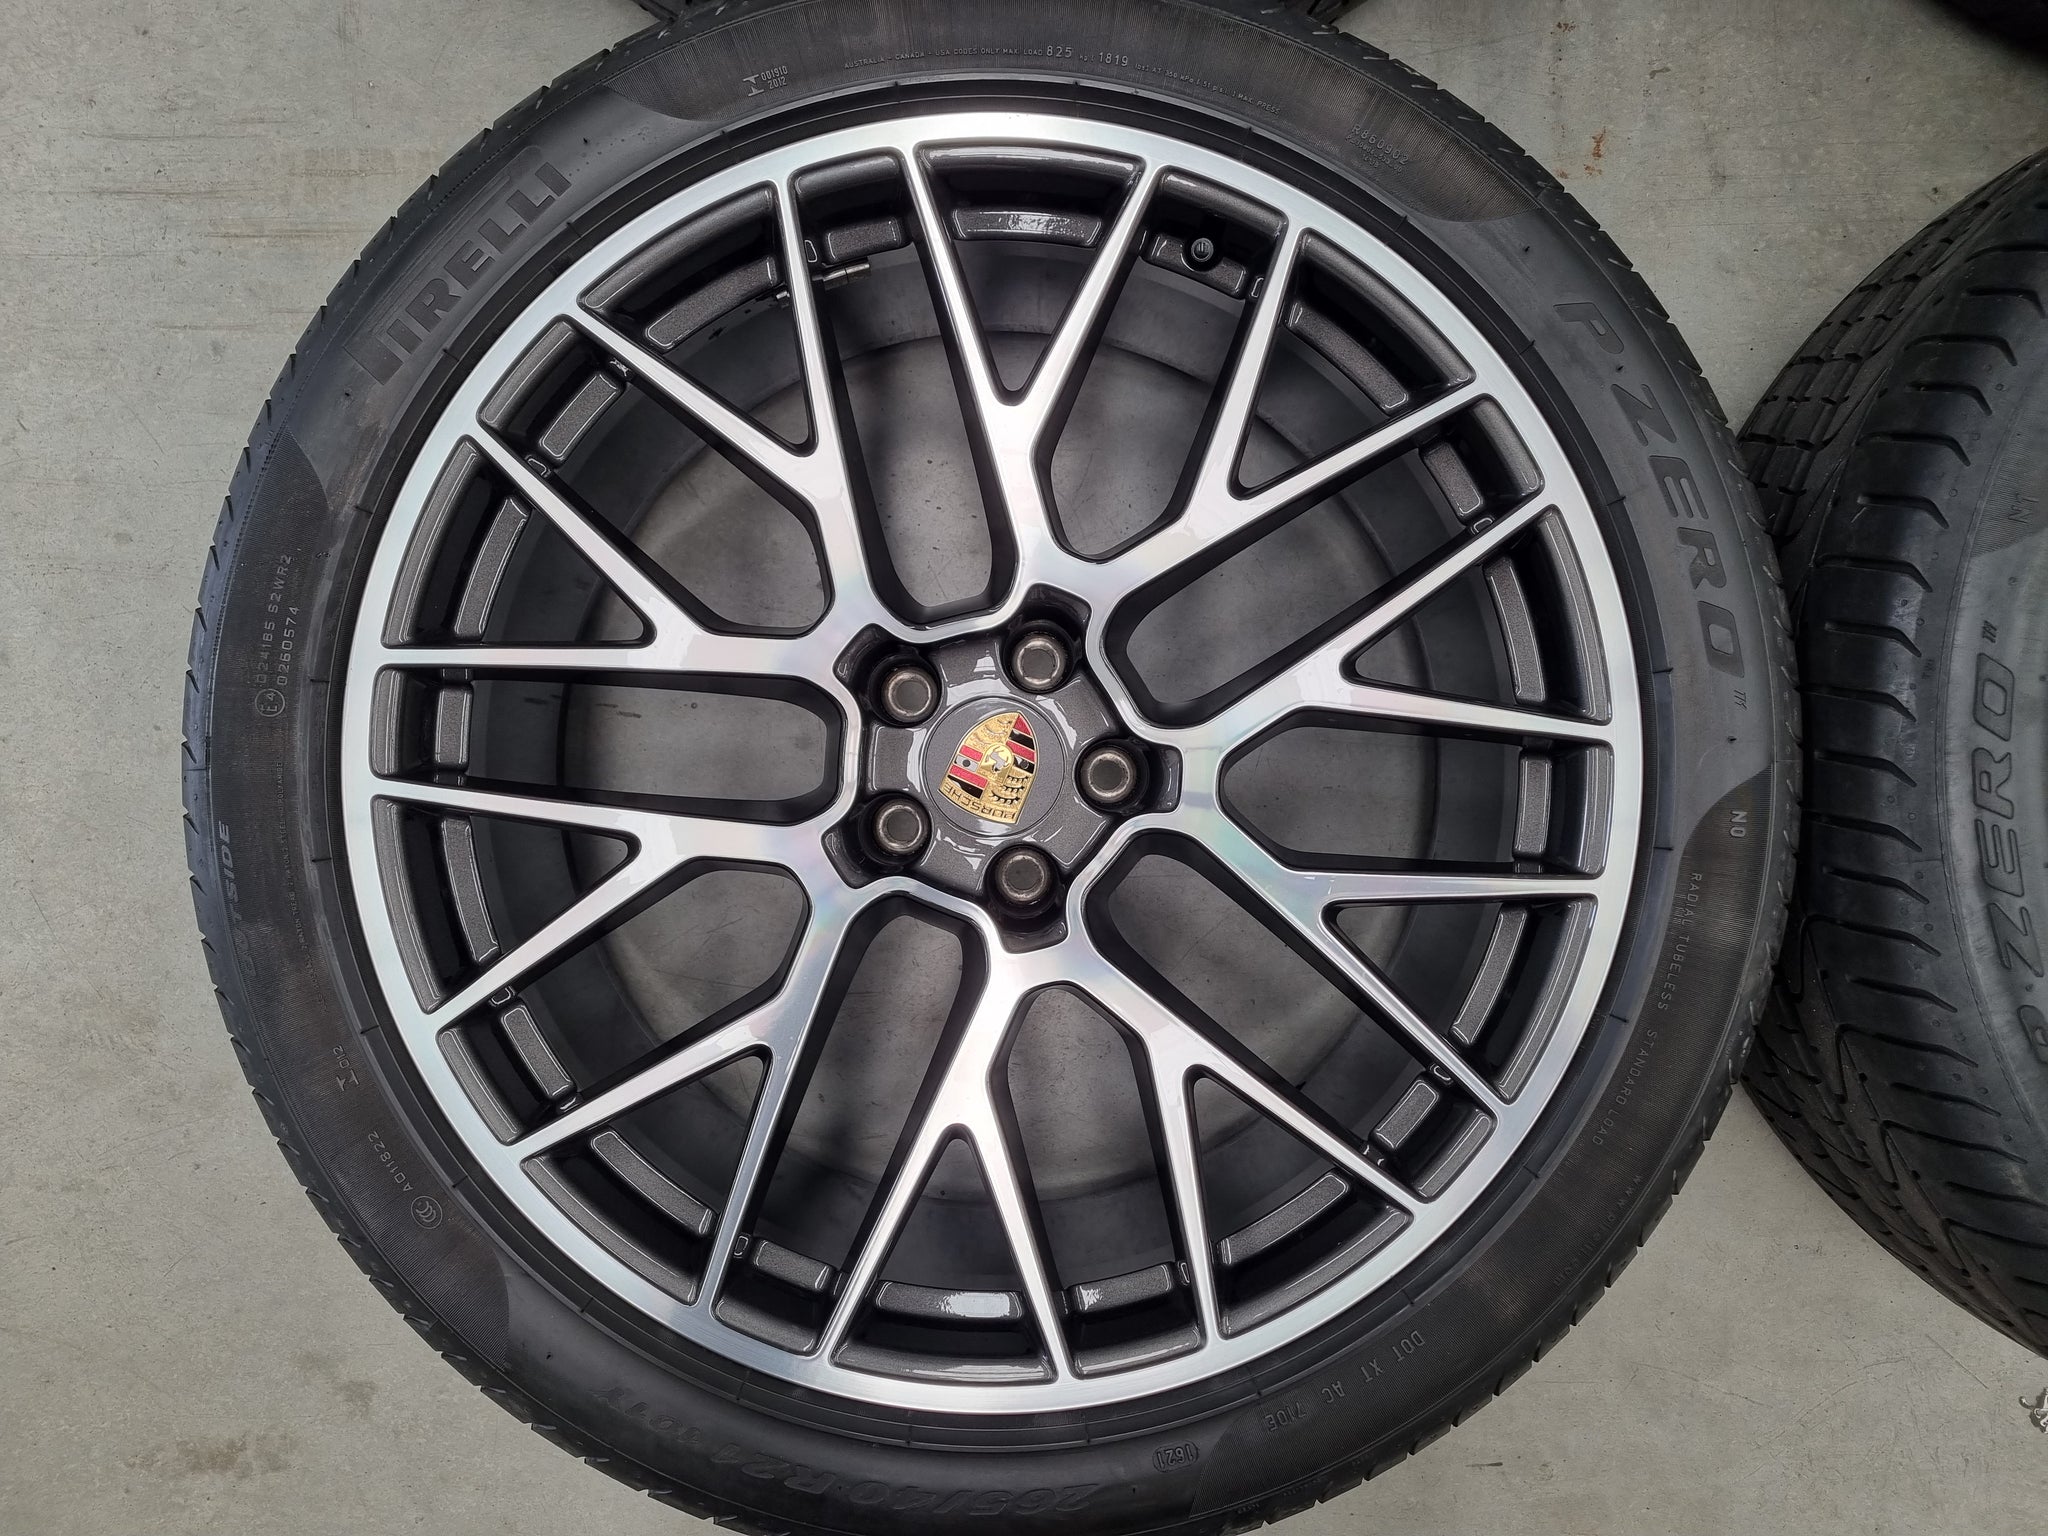 Load image into Gallery viewer, Genuine Porsche Macan 2021 Model 21 Inch Spyder Wheels and Tyres Set of 4
